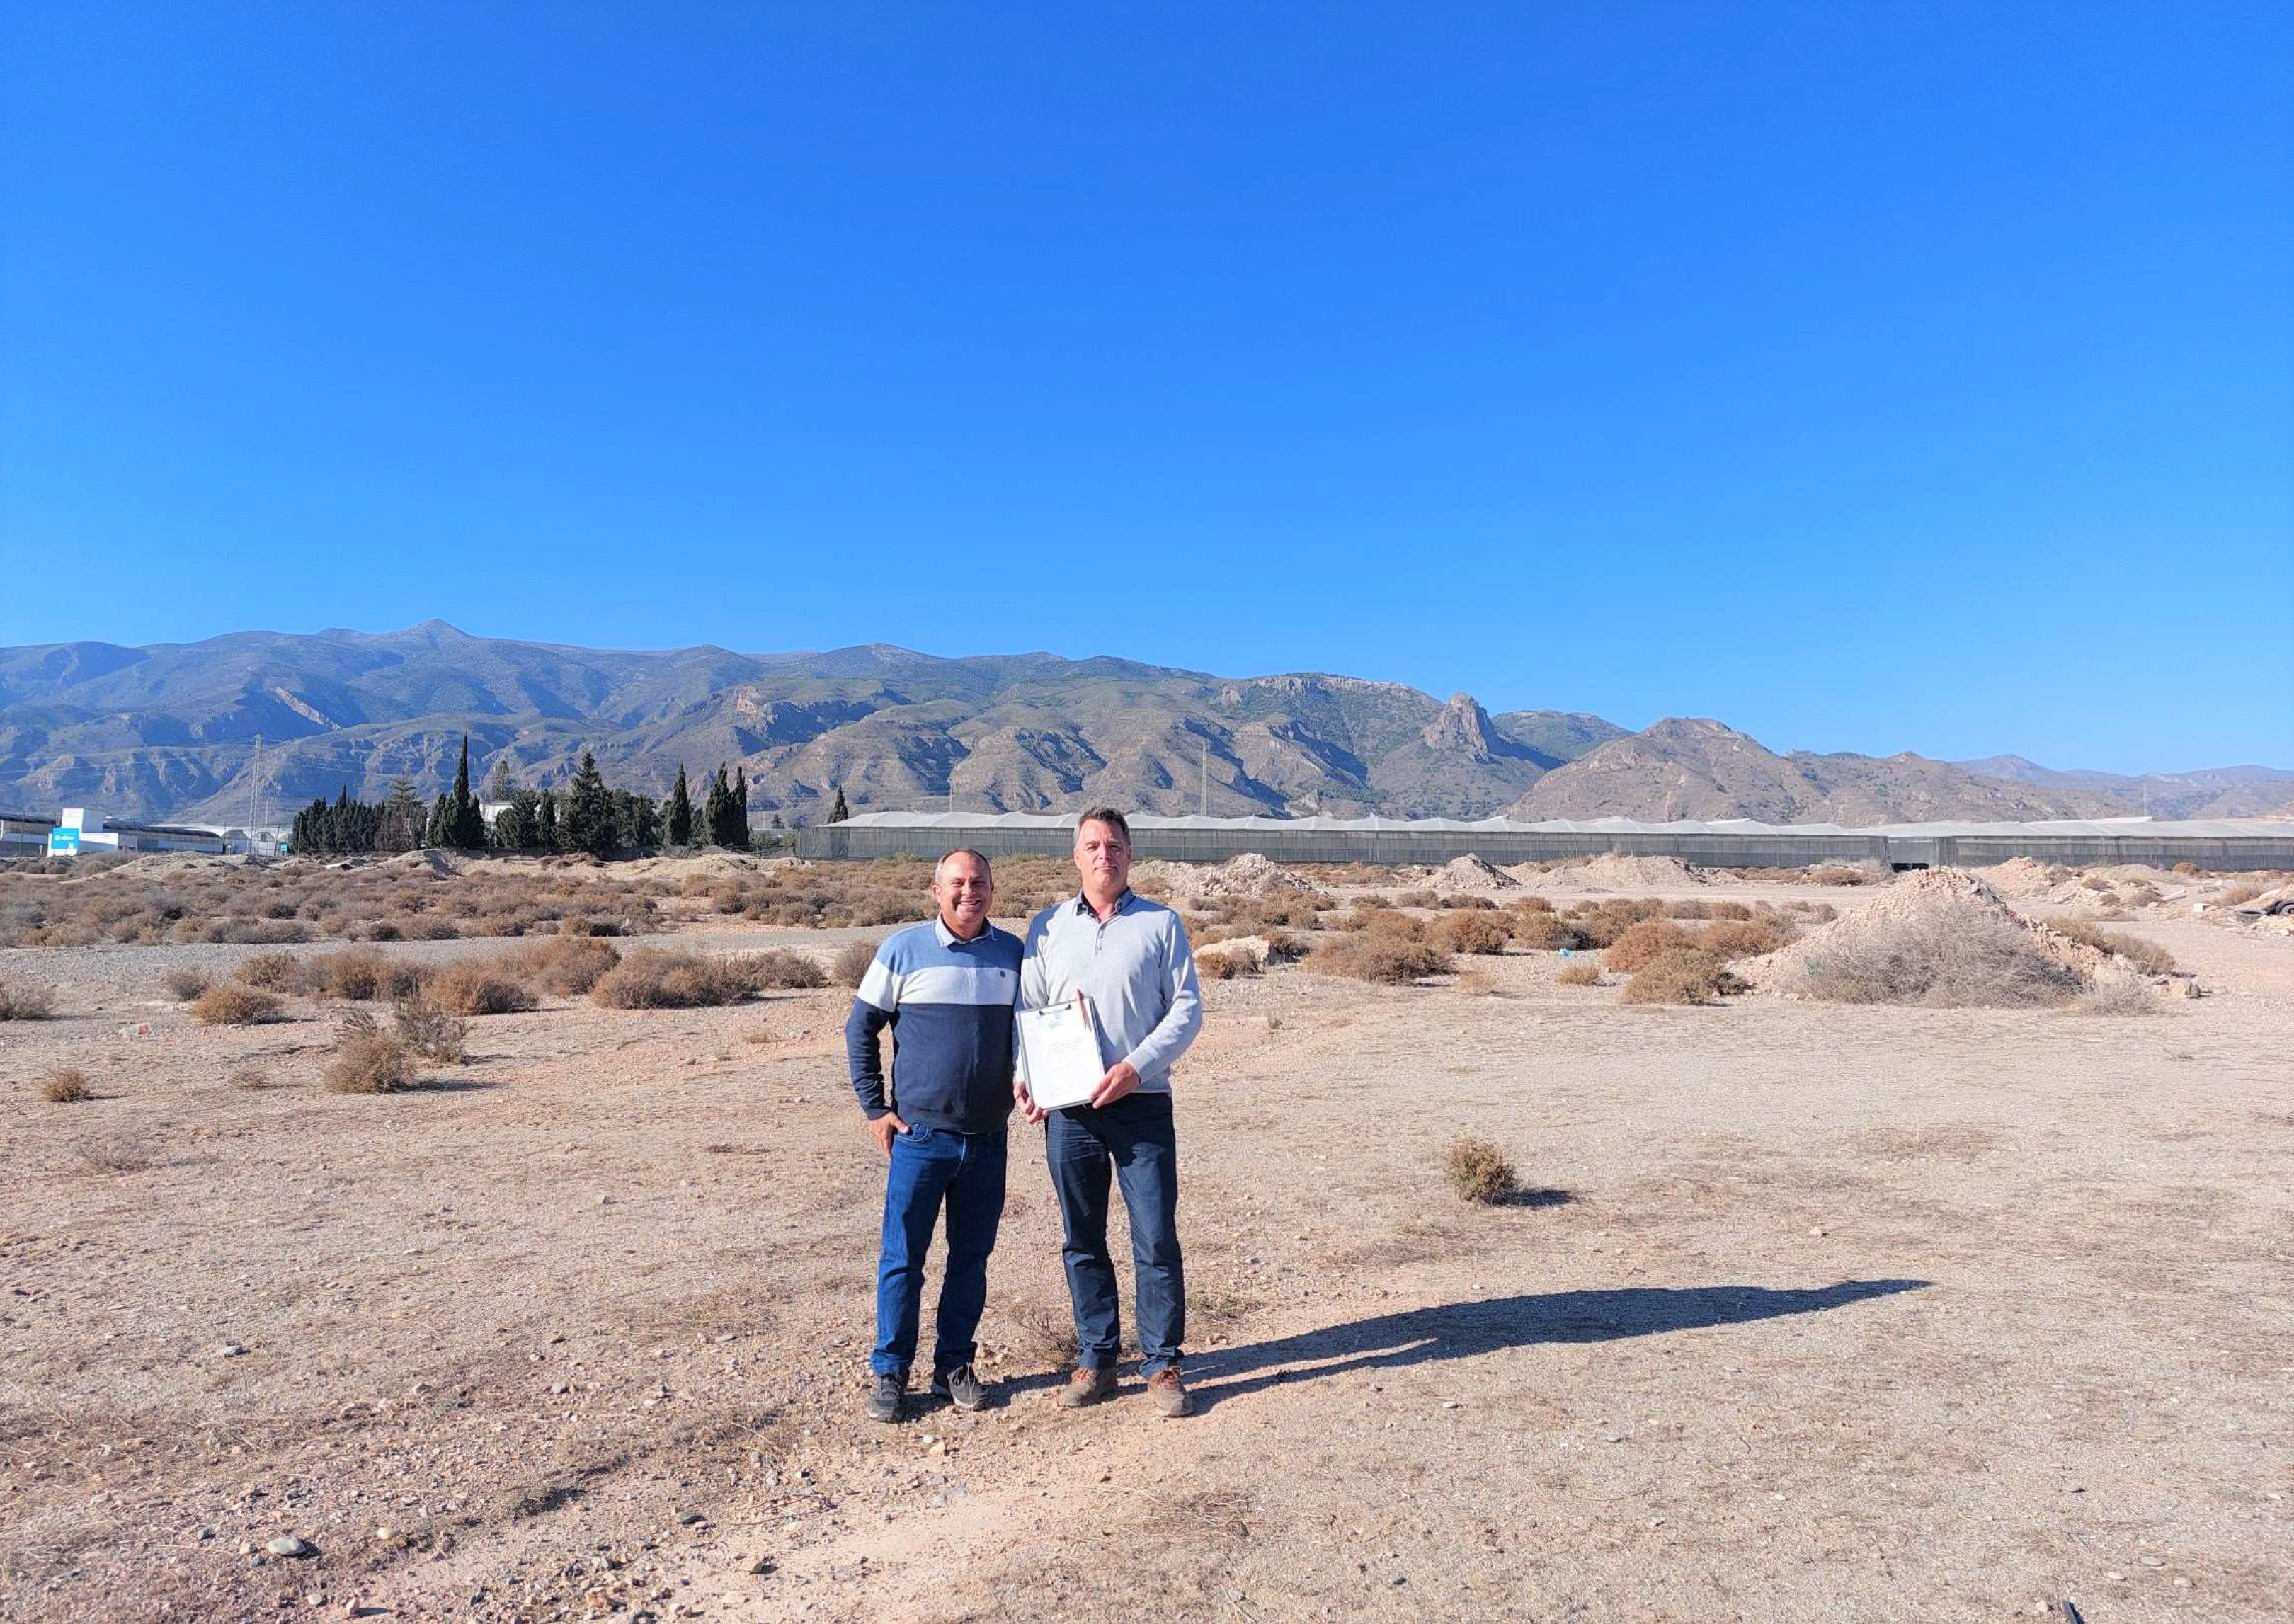 Javier Checa, Farm Manager and Wybe van der Schaar, Head of Breeding Spain on the 
recently acquired plot in the area in El Ejido, Almería